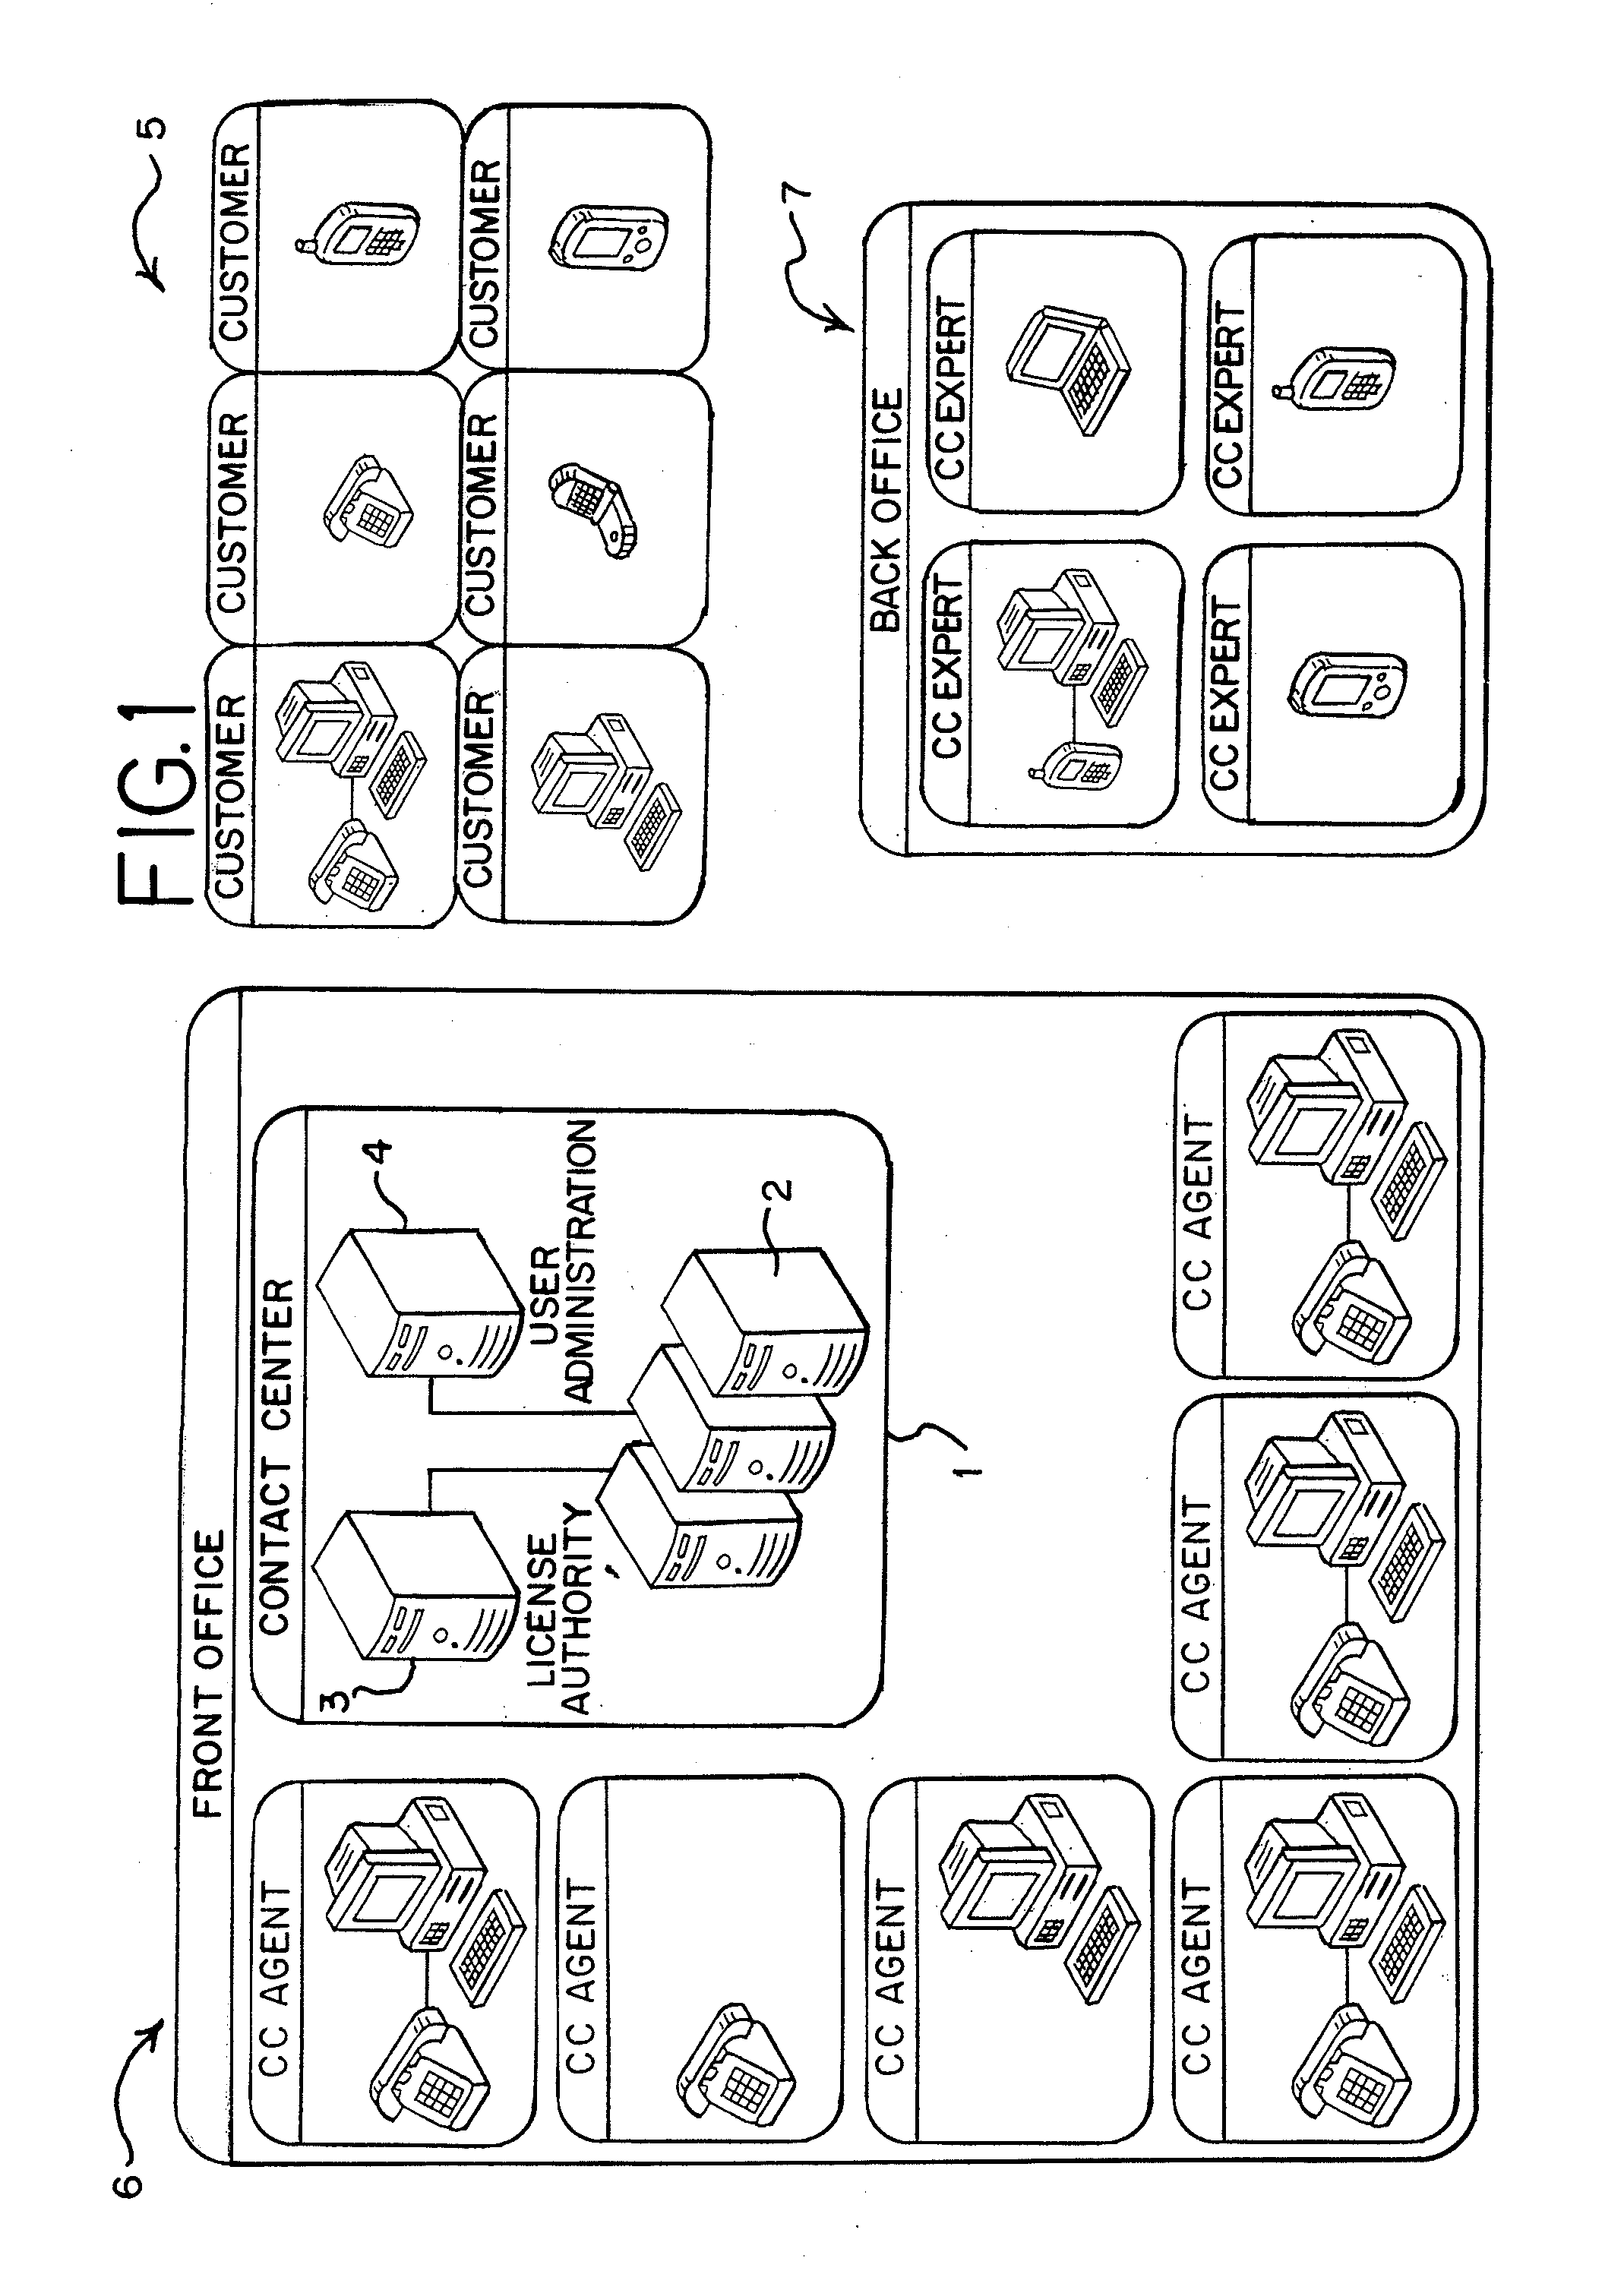 Method and System for Controlling Establishment of Communication Channels in a Contact Centre